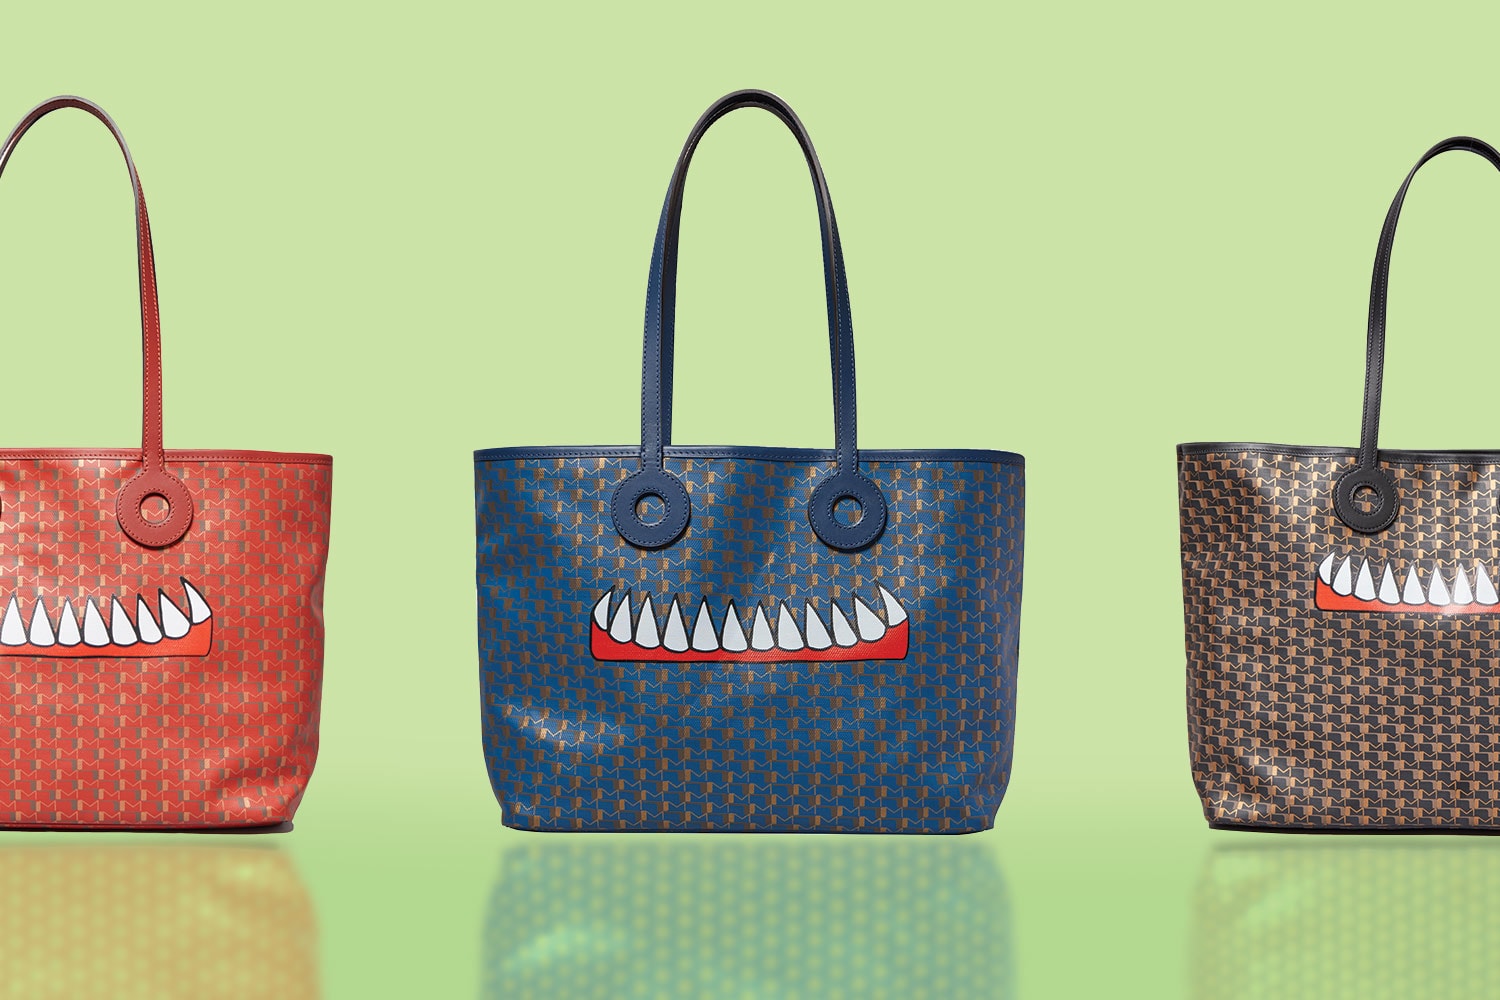 Moynat's 'Bad Dreams' Collection is Playful and Whimsical